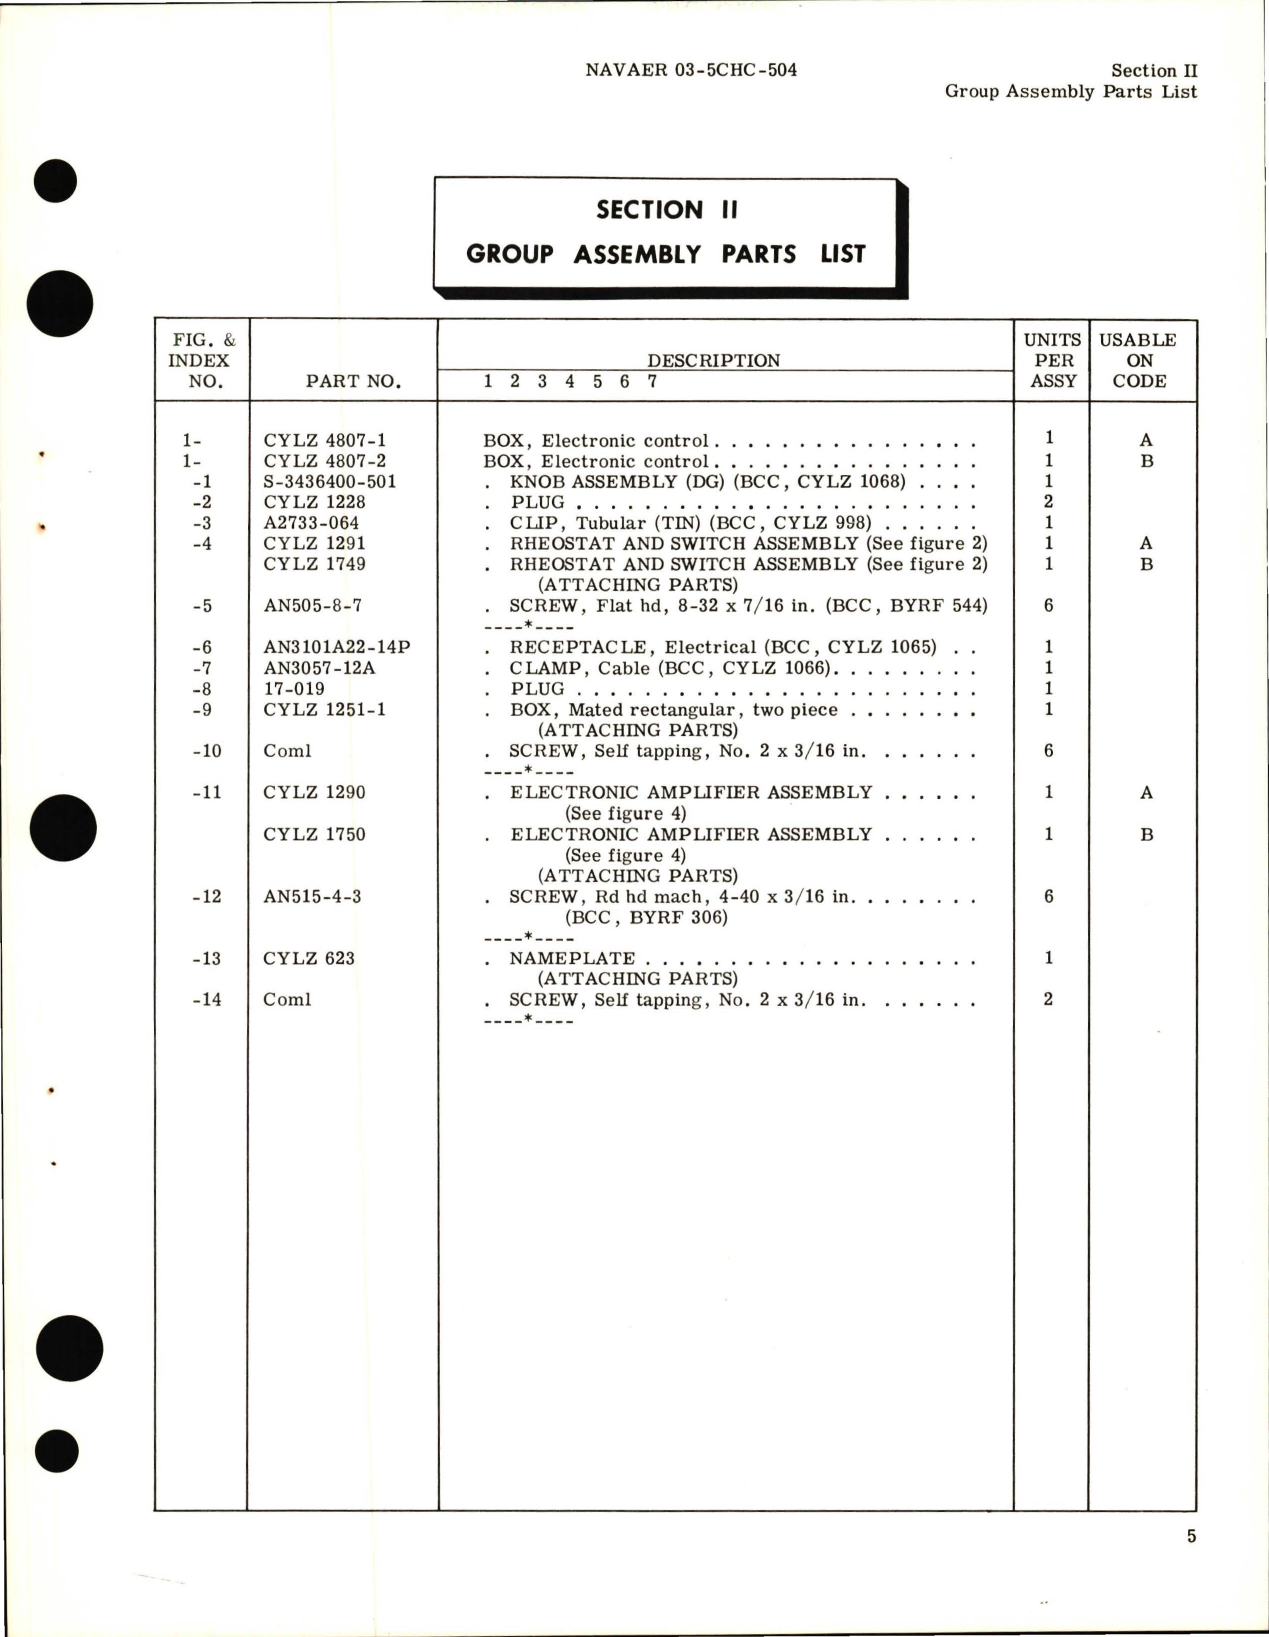 Sample page 9 from AirCorps Library document: Illustrated Parts Breakdown for Electronic Control Box - CYLZ 4807-1 and CYLZ 4807-2